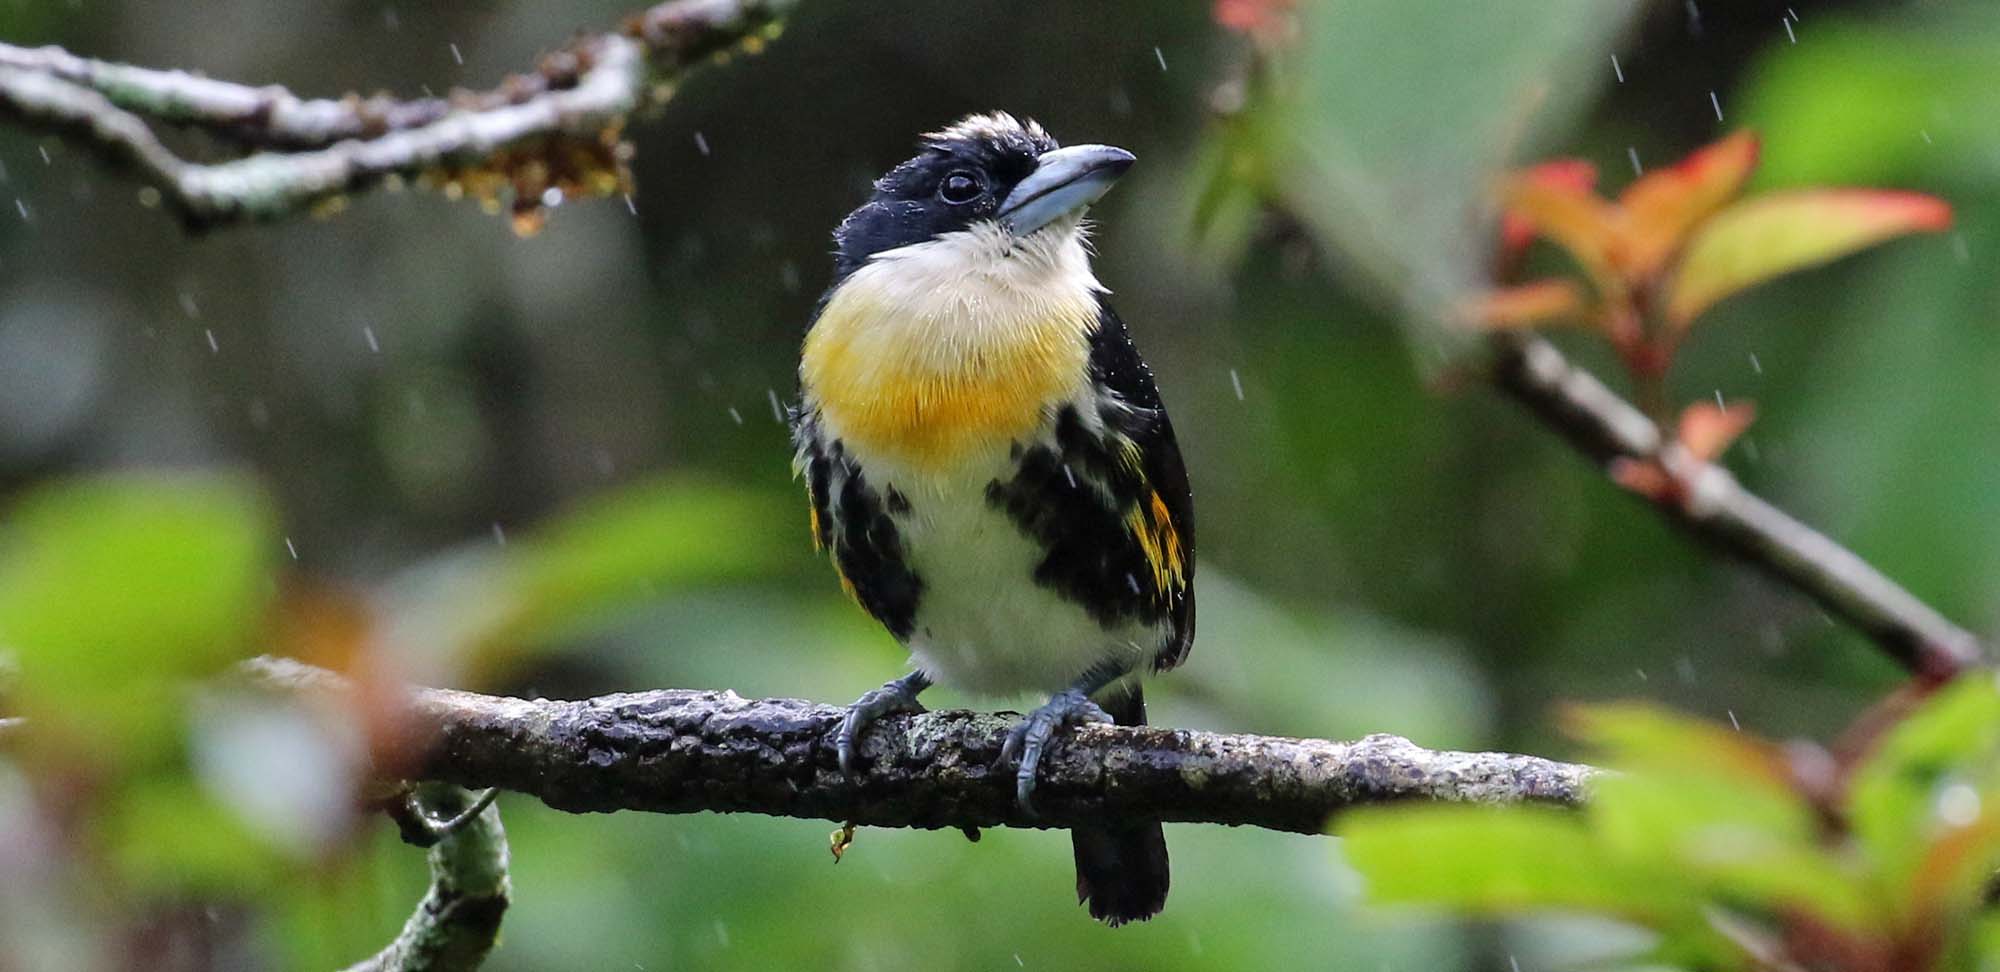 Spot-crowned Barbet Field Guides Birding Tours Panama